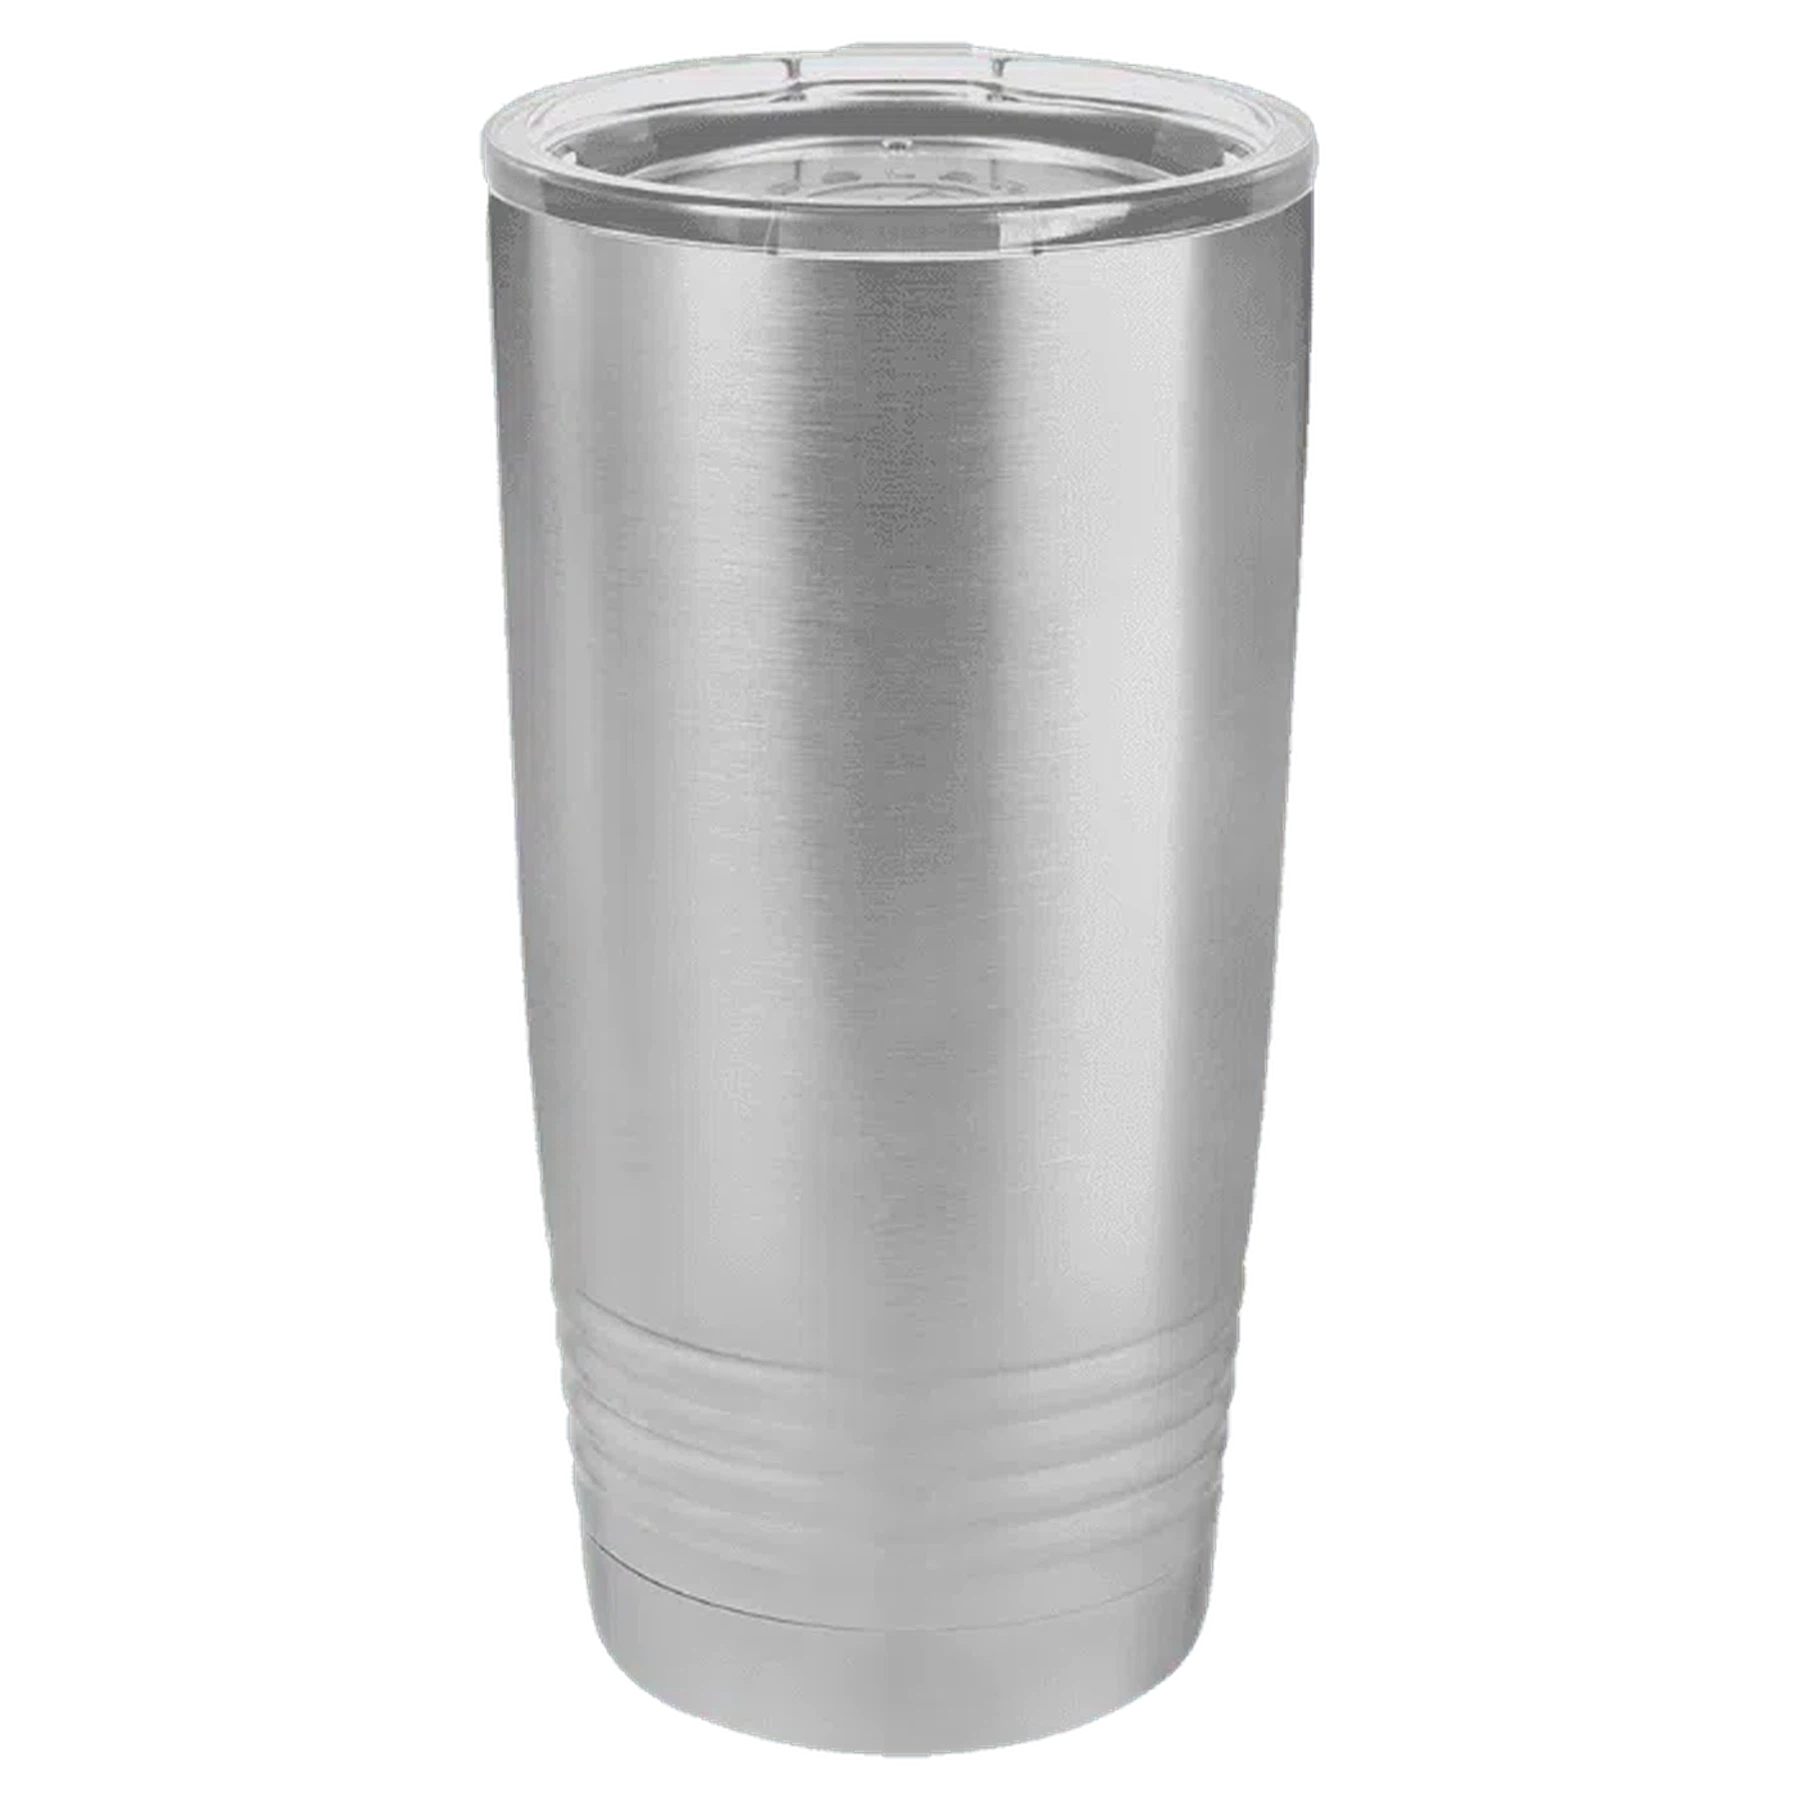 Polar Camel 20 oz. Insulated Ringneck Tumbler with Slider Lid (Assorted Colors)